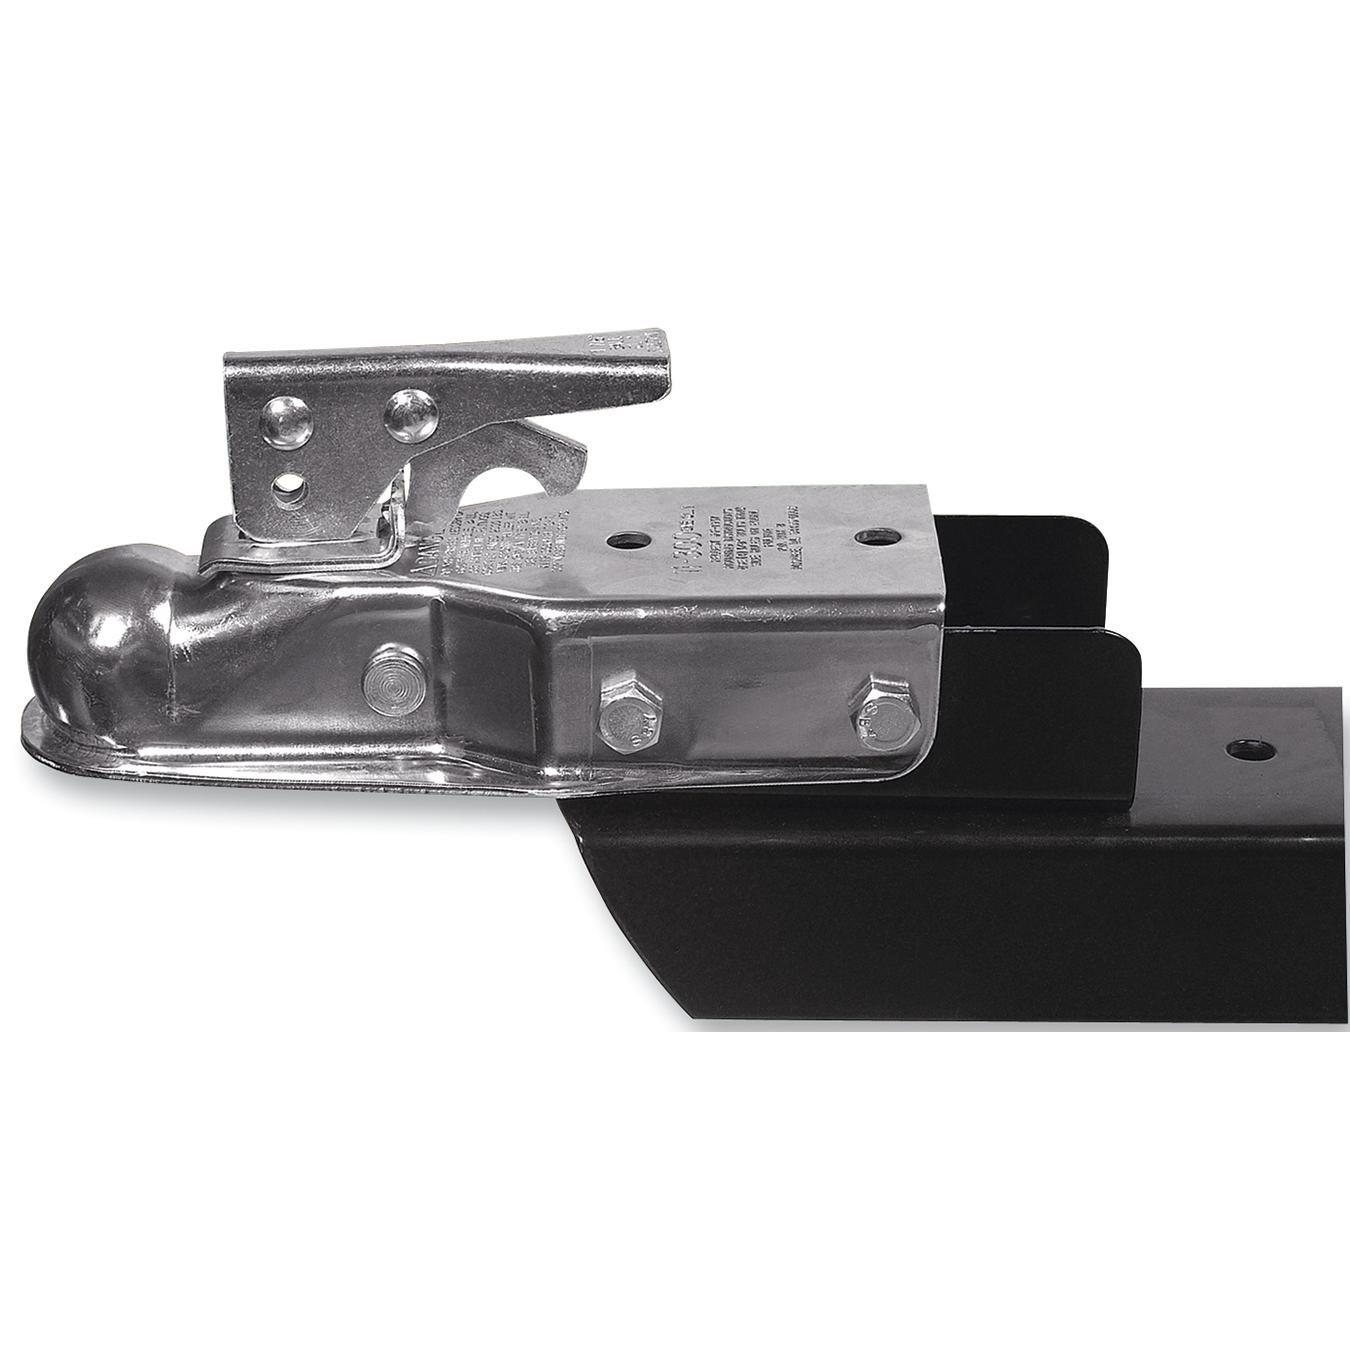 Moose racing ball hitch conversion kit motorcycle trailers-carriers